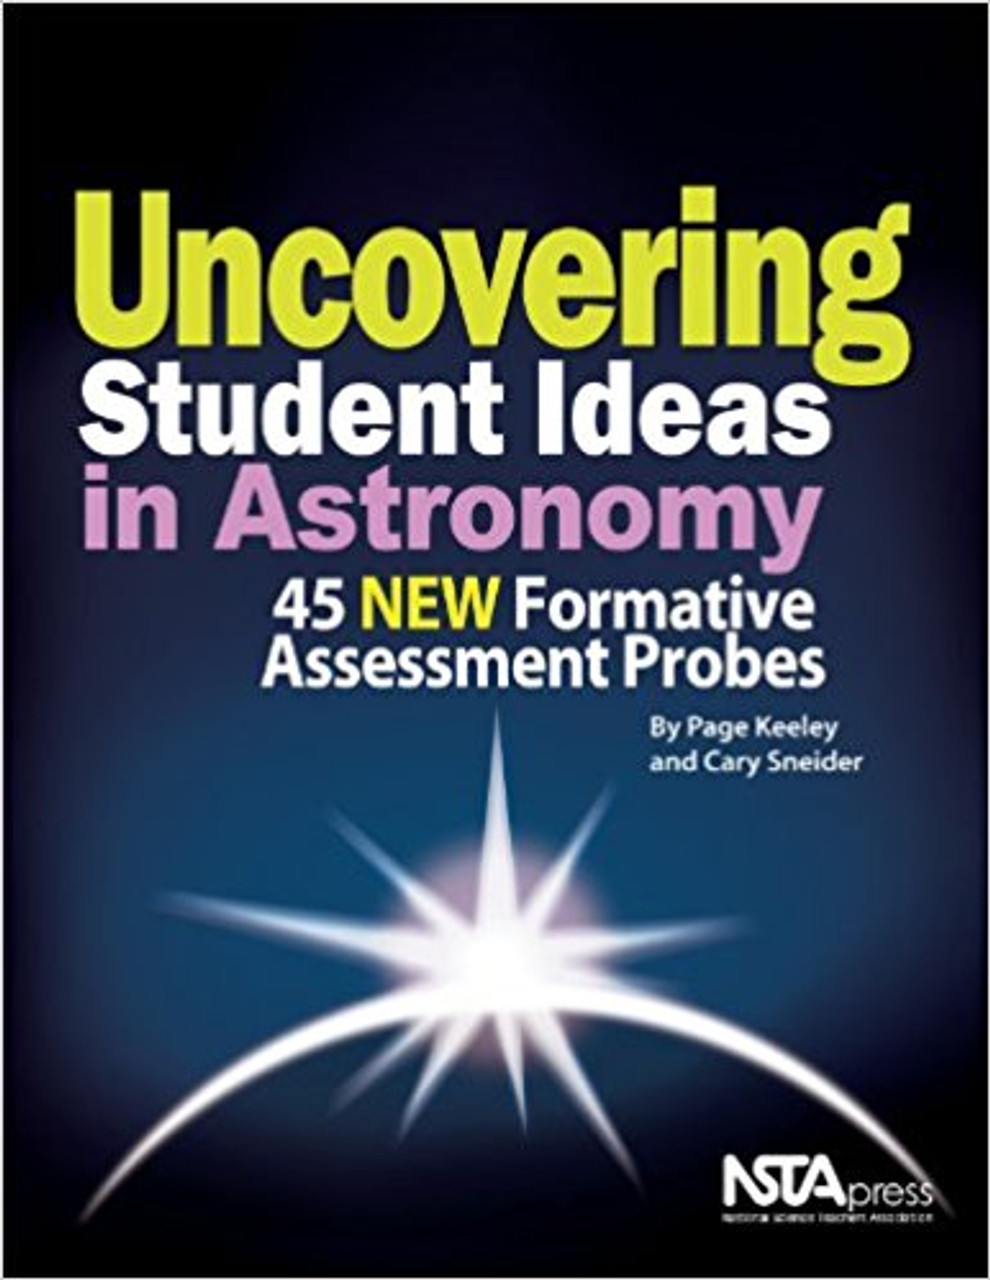 Uncovering Student Ideas in Astronomy: 45 New Formative Assessment Probes by Page D Keeley